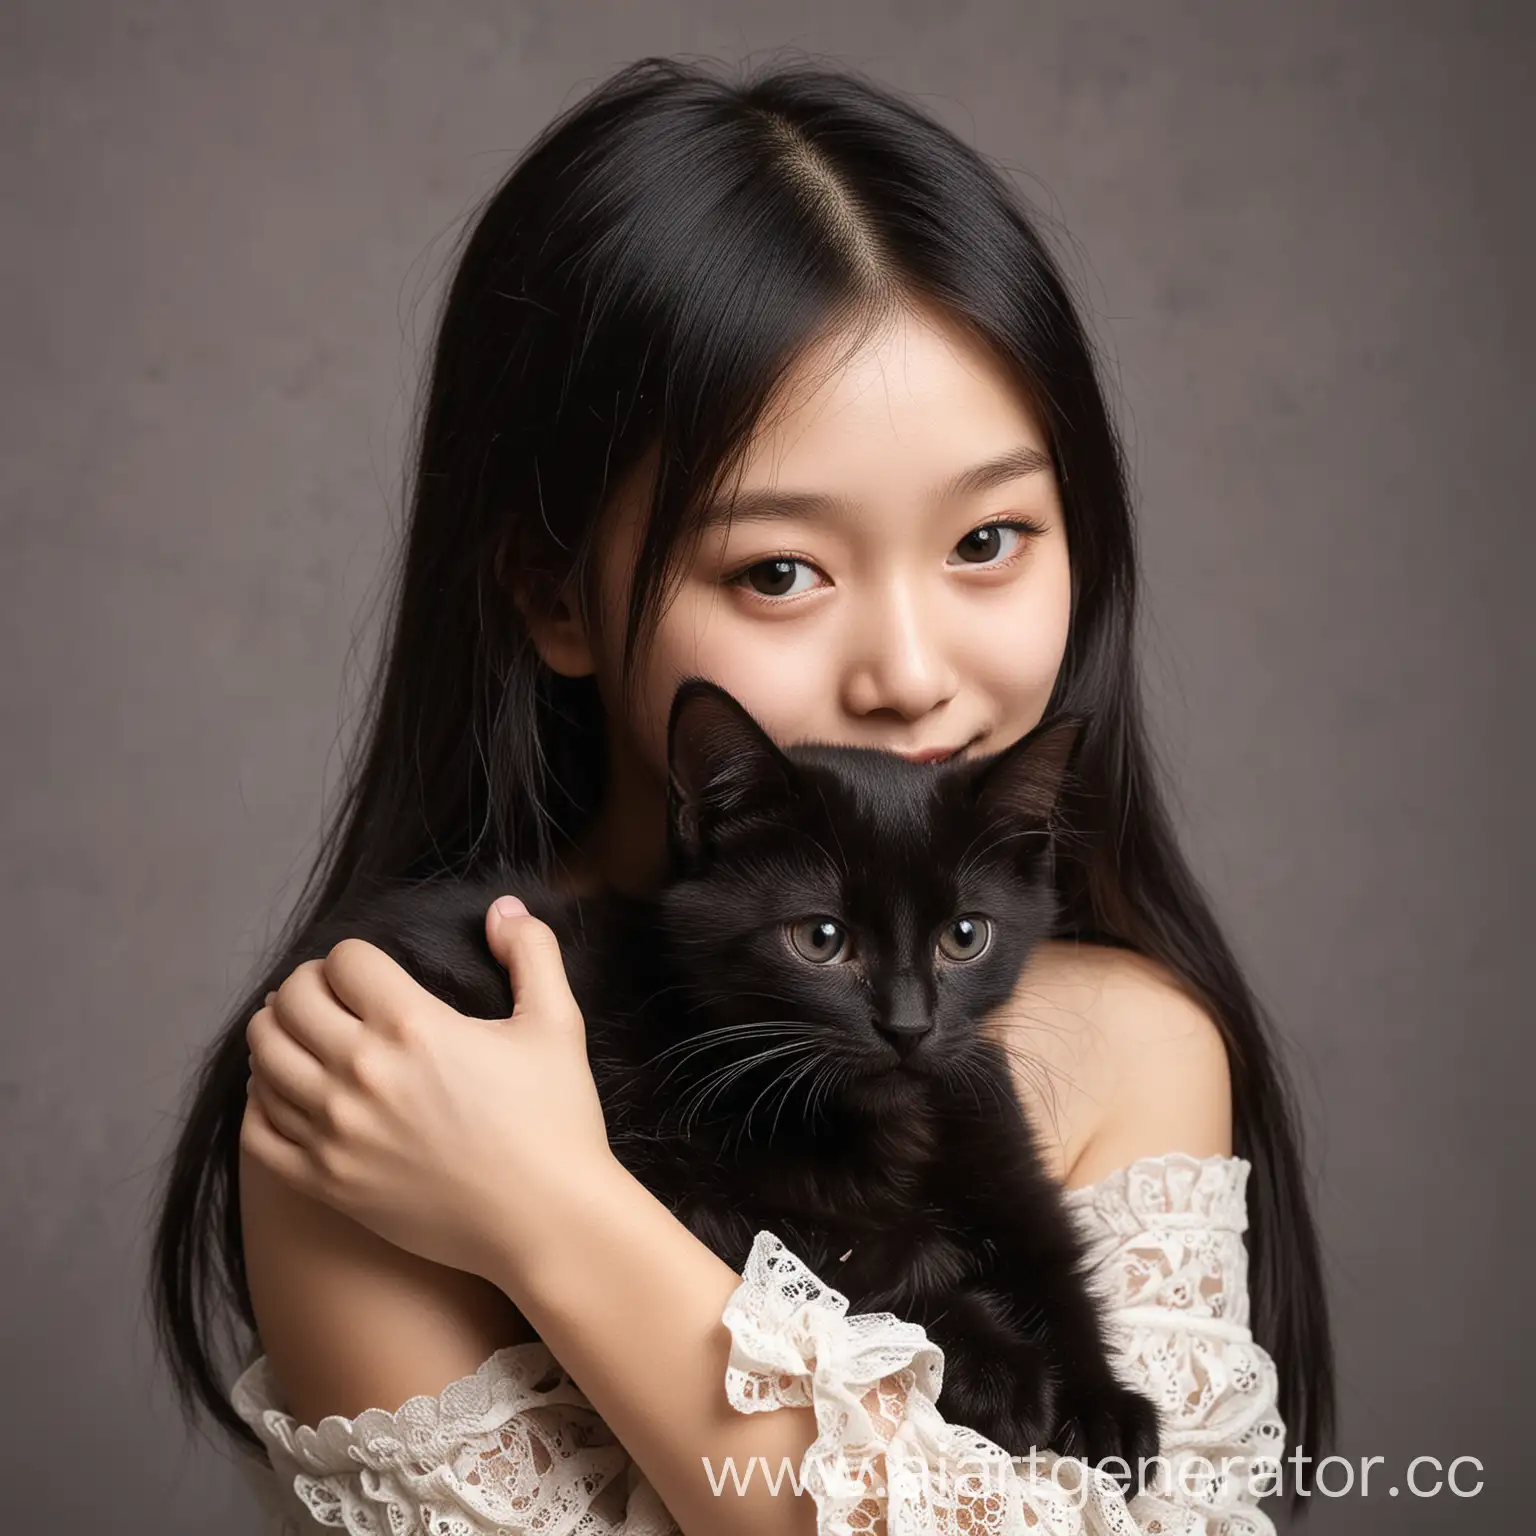 Asian-Girl-Embracing-Black-Kitten-with-Affectionate-Gesture